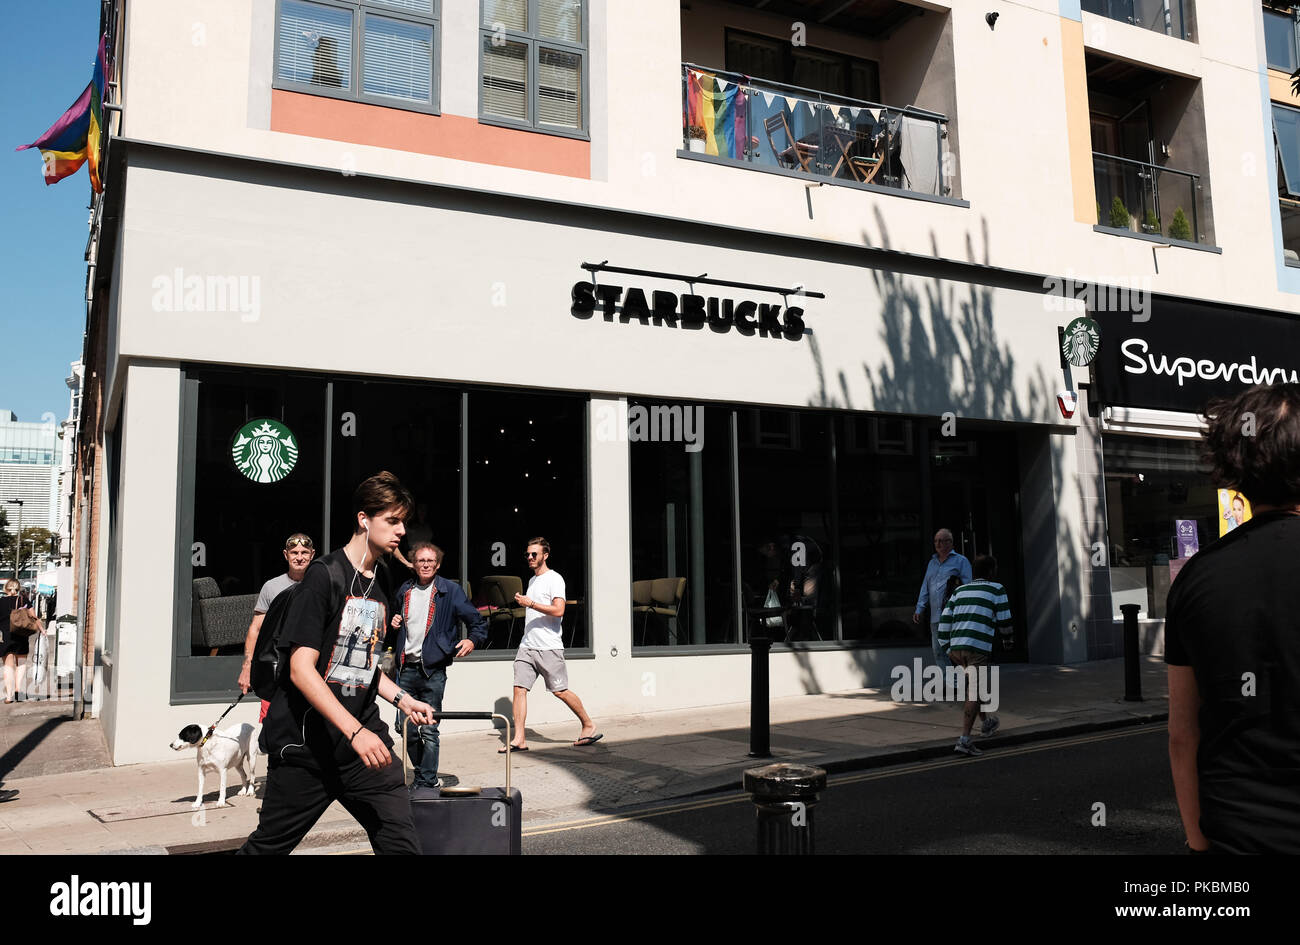 Recently opened Starbucks coffee house cafe in St James's Street Kemp Town Brighton Photograph taken by Simon Dack Stock Photo